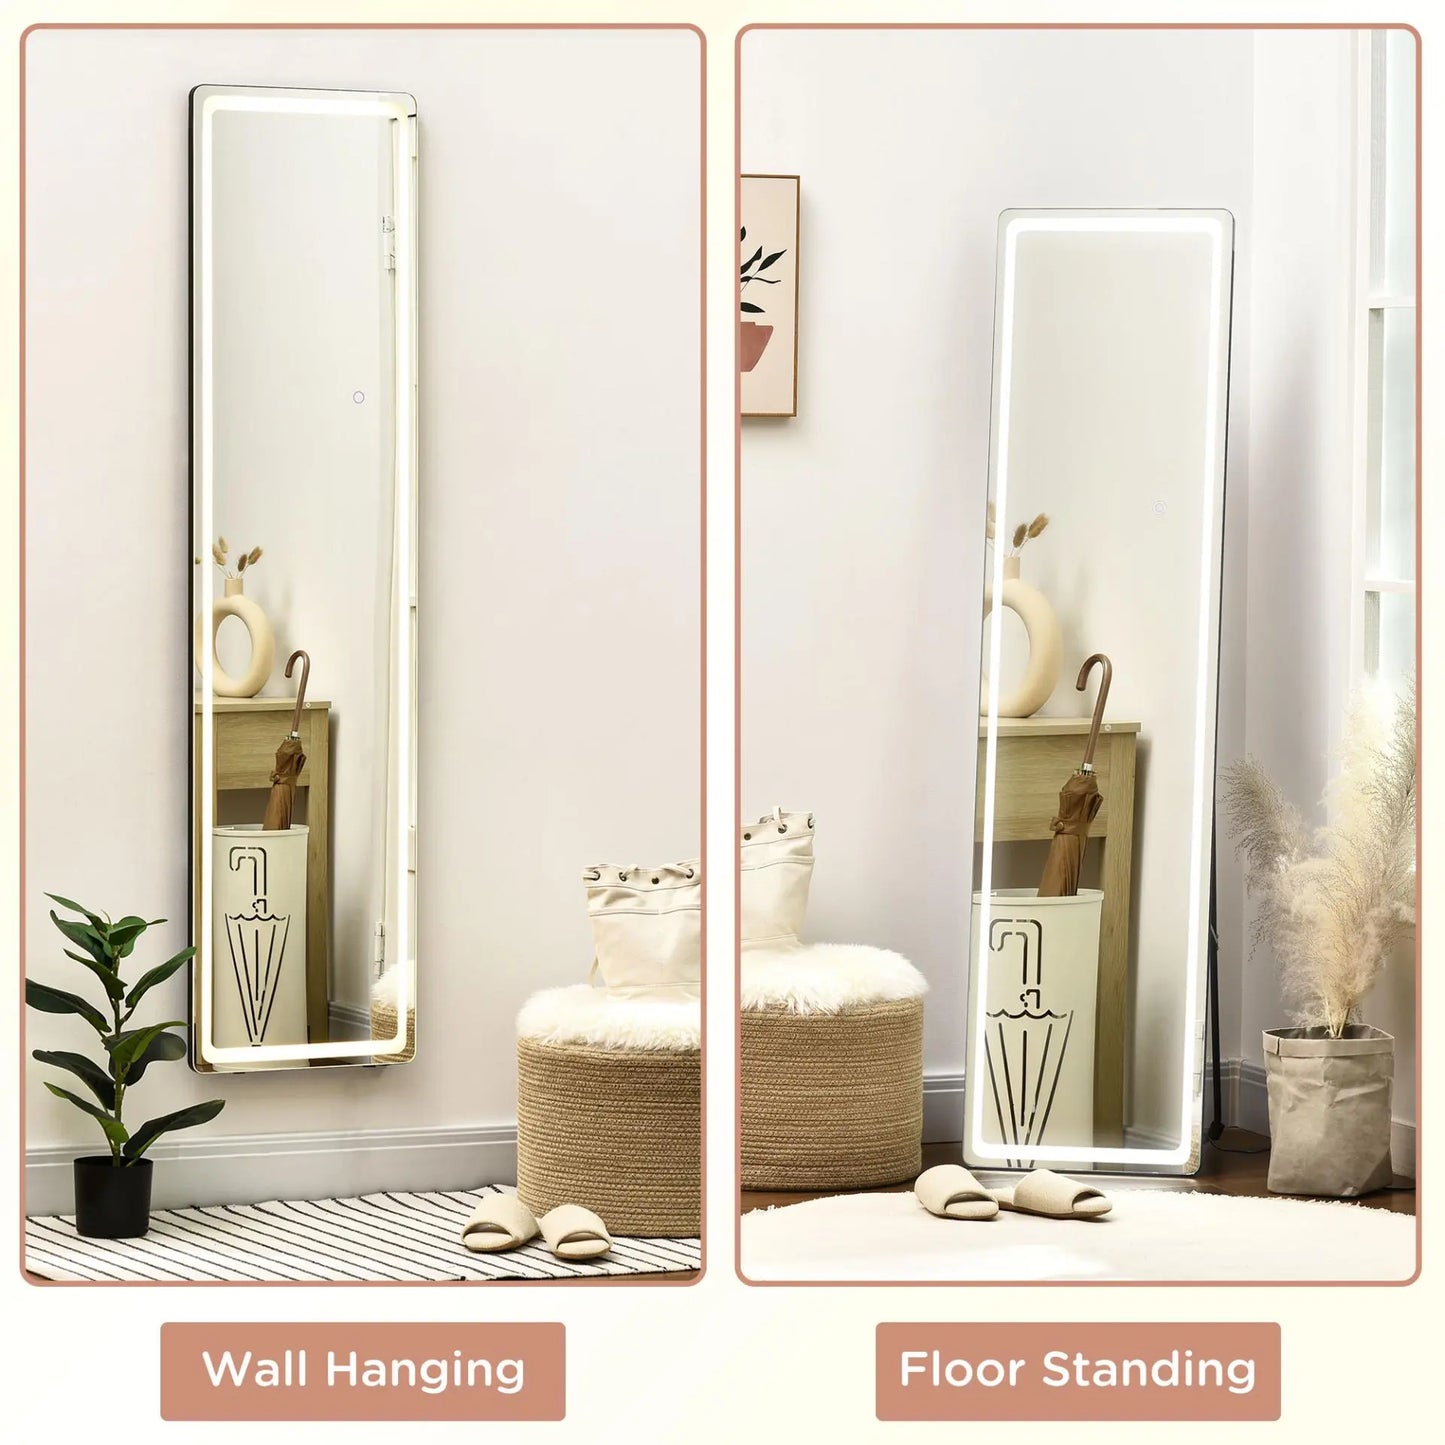 Full-Length Mirror with LED Lights and Remote Control. Londecor